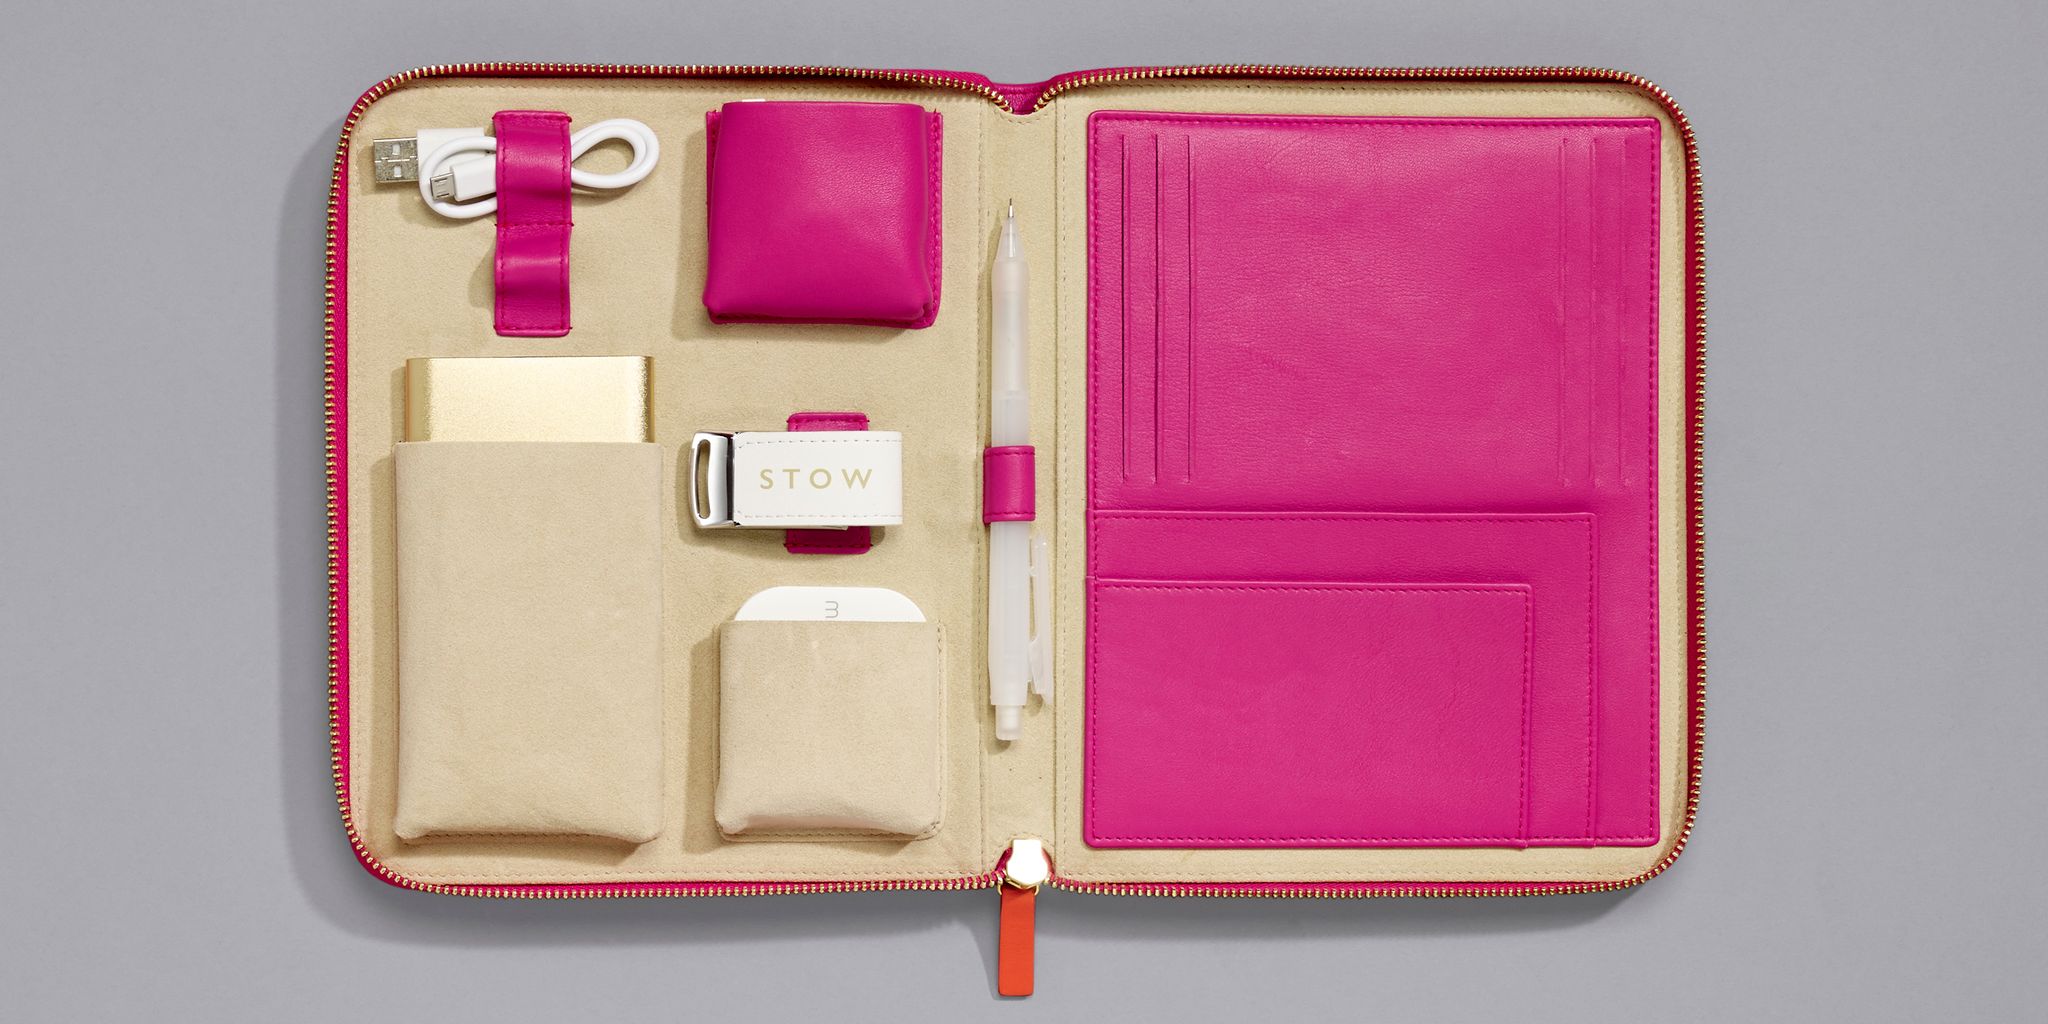 Stow Luxury Leather Travel Tech Case from Not On The High Street